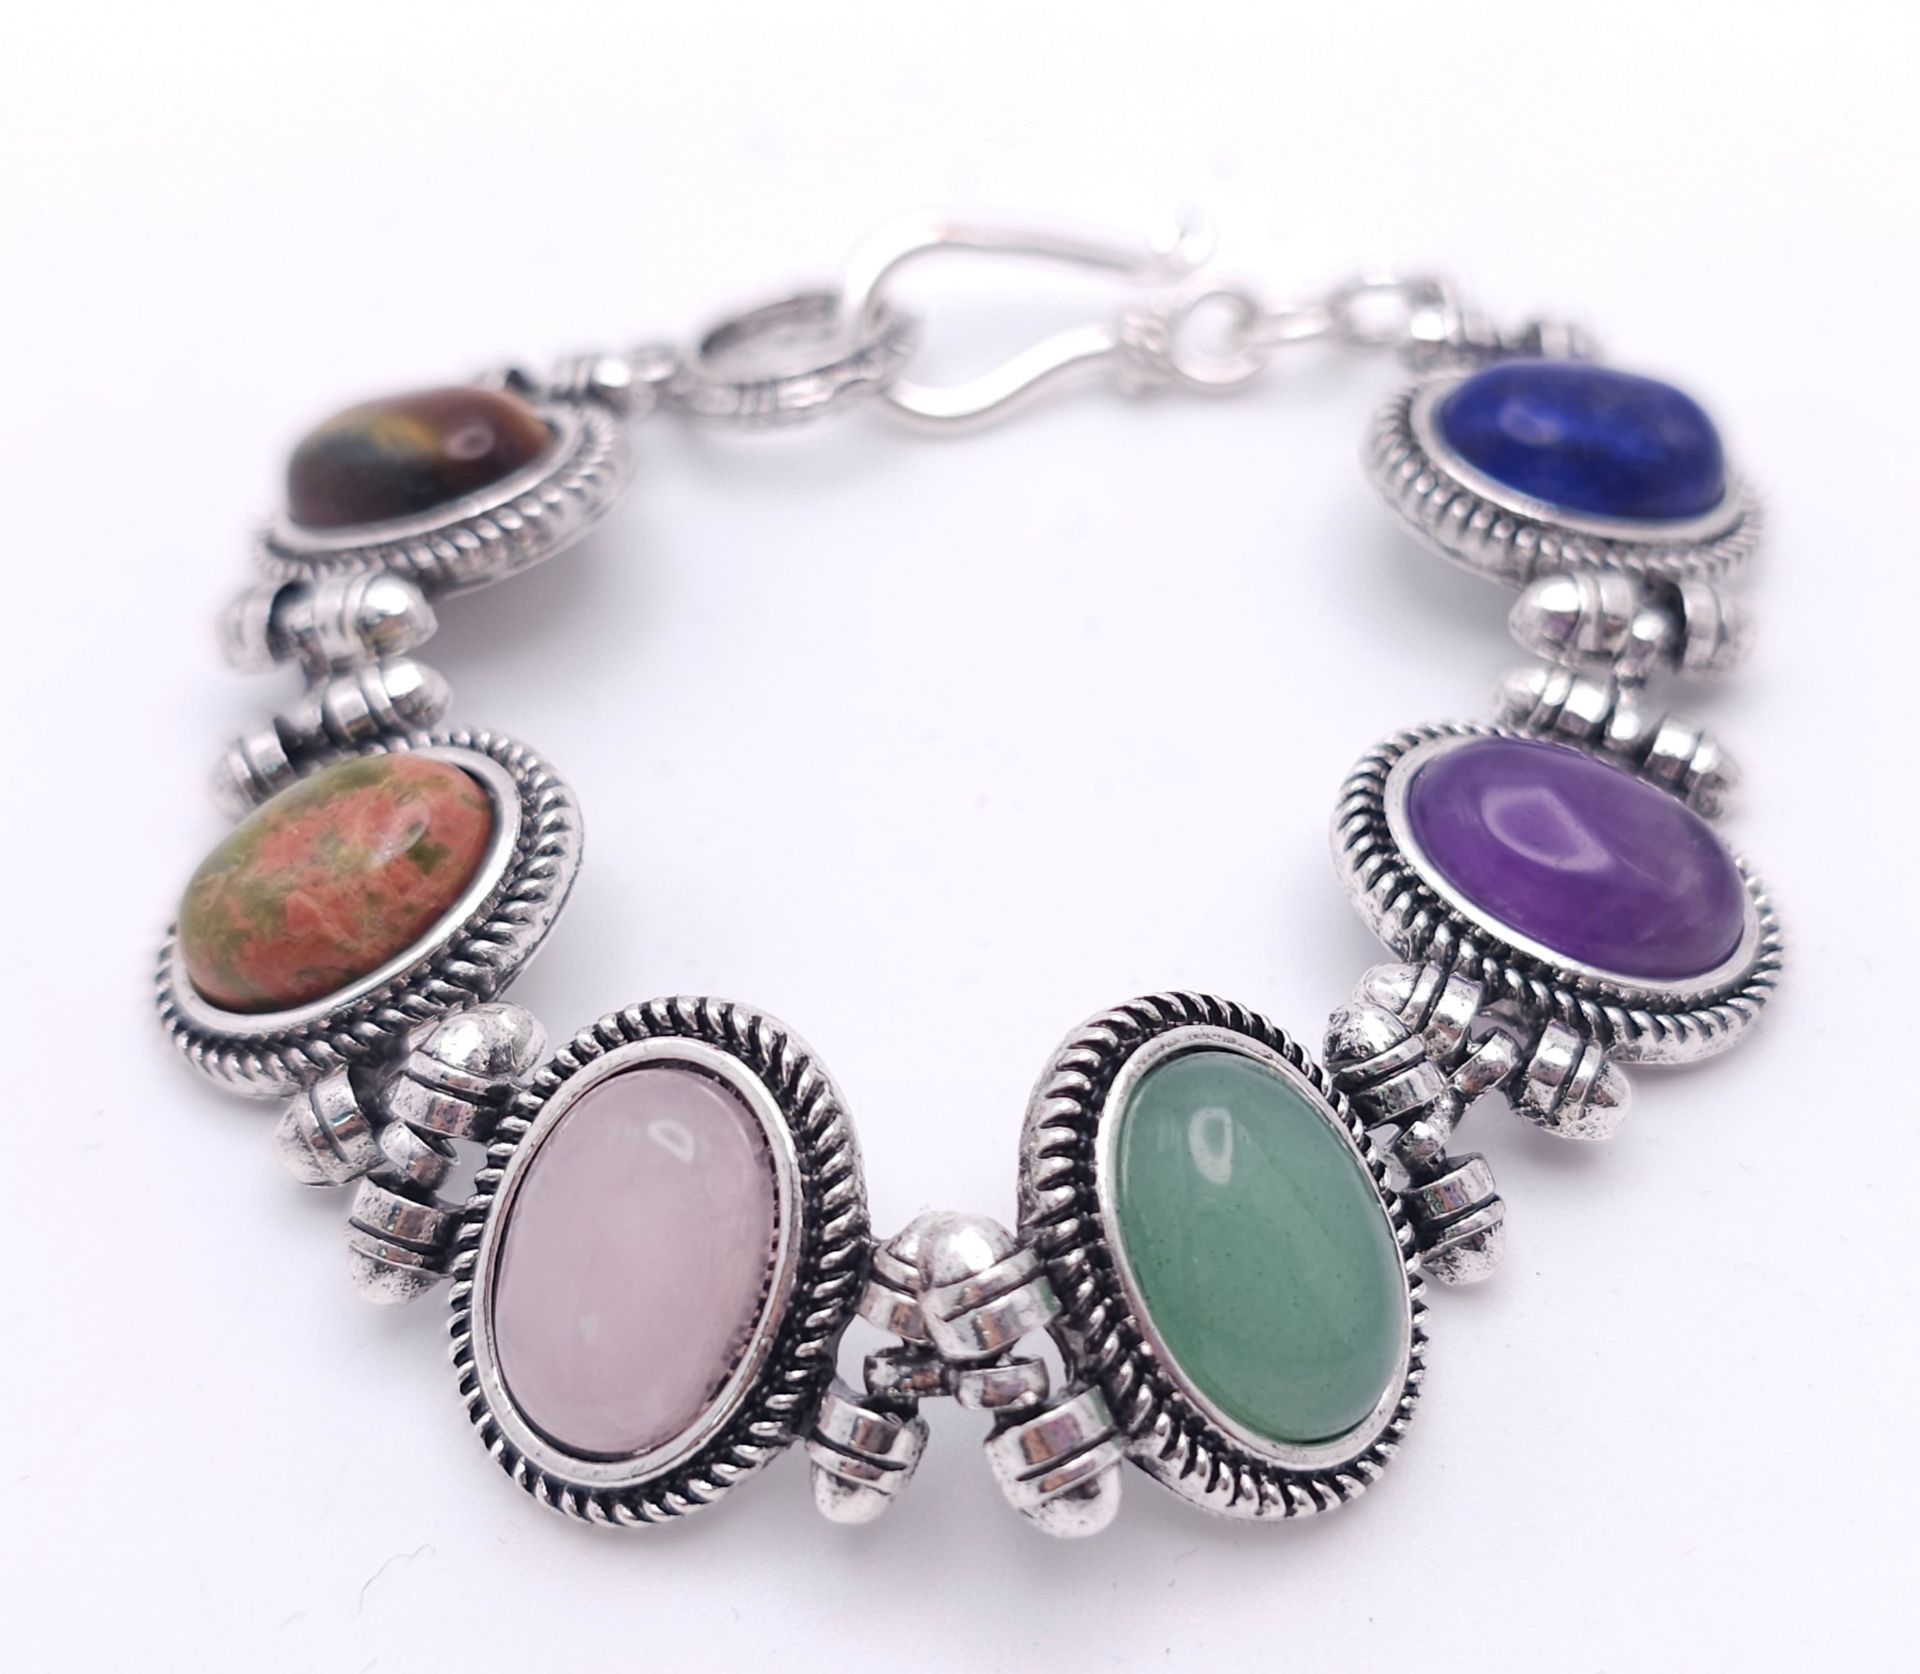 A Multi Gemstone 925 Silver Bracelet - 17cm, and Necklace - 42cm. Also comes with a pair of earrings - Image 6 of 8